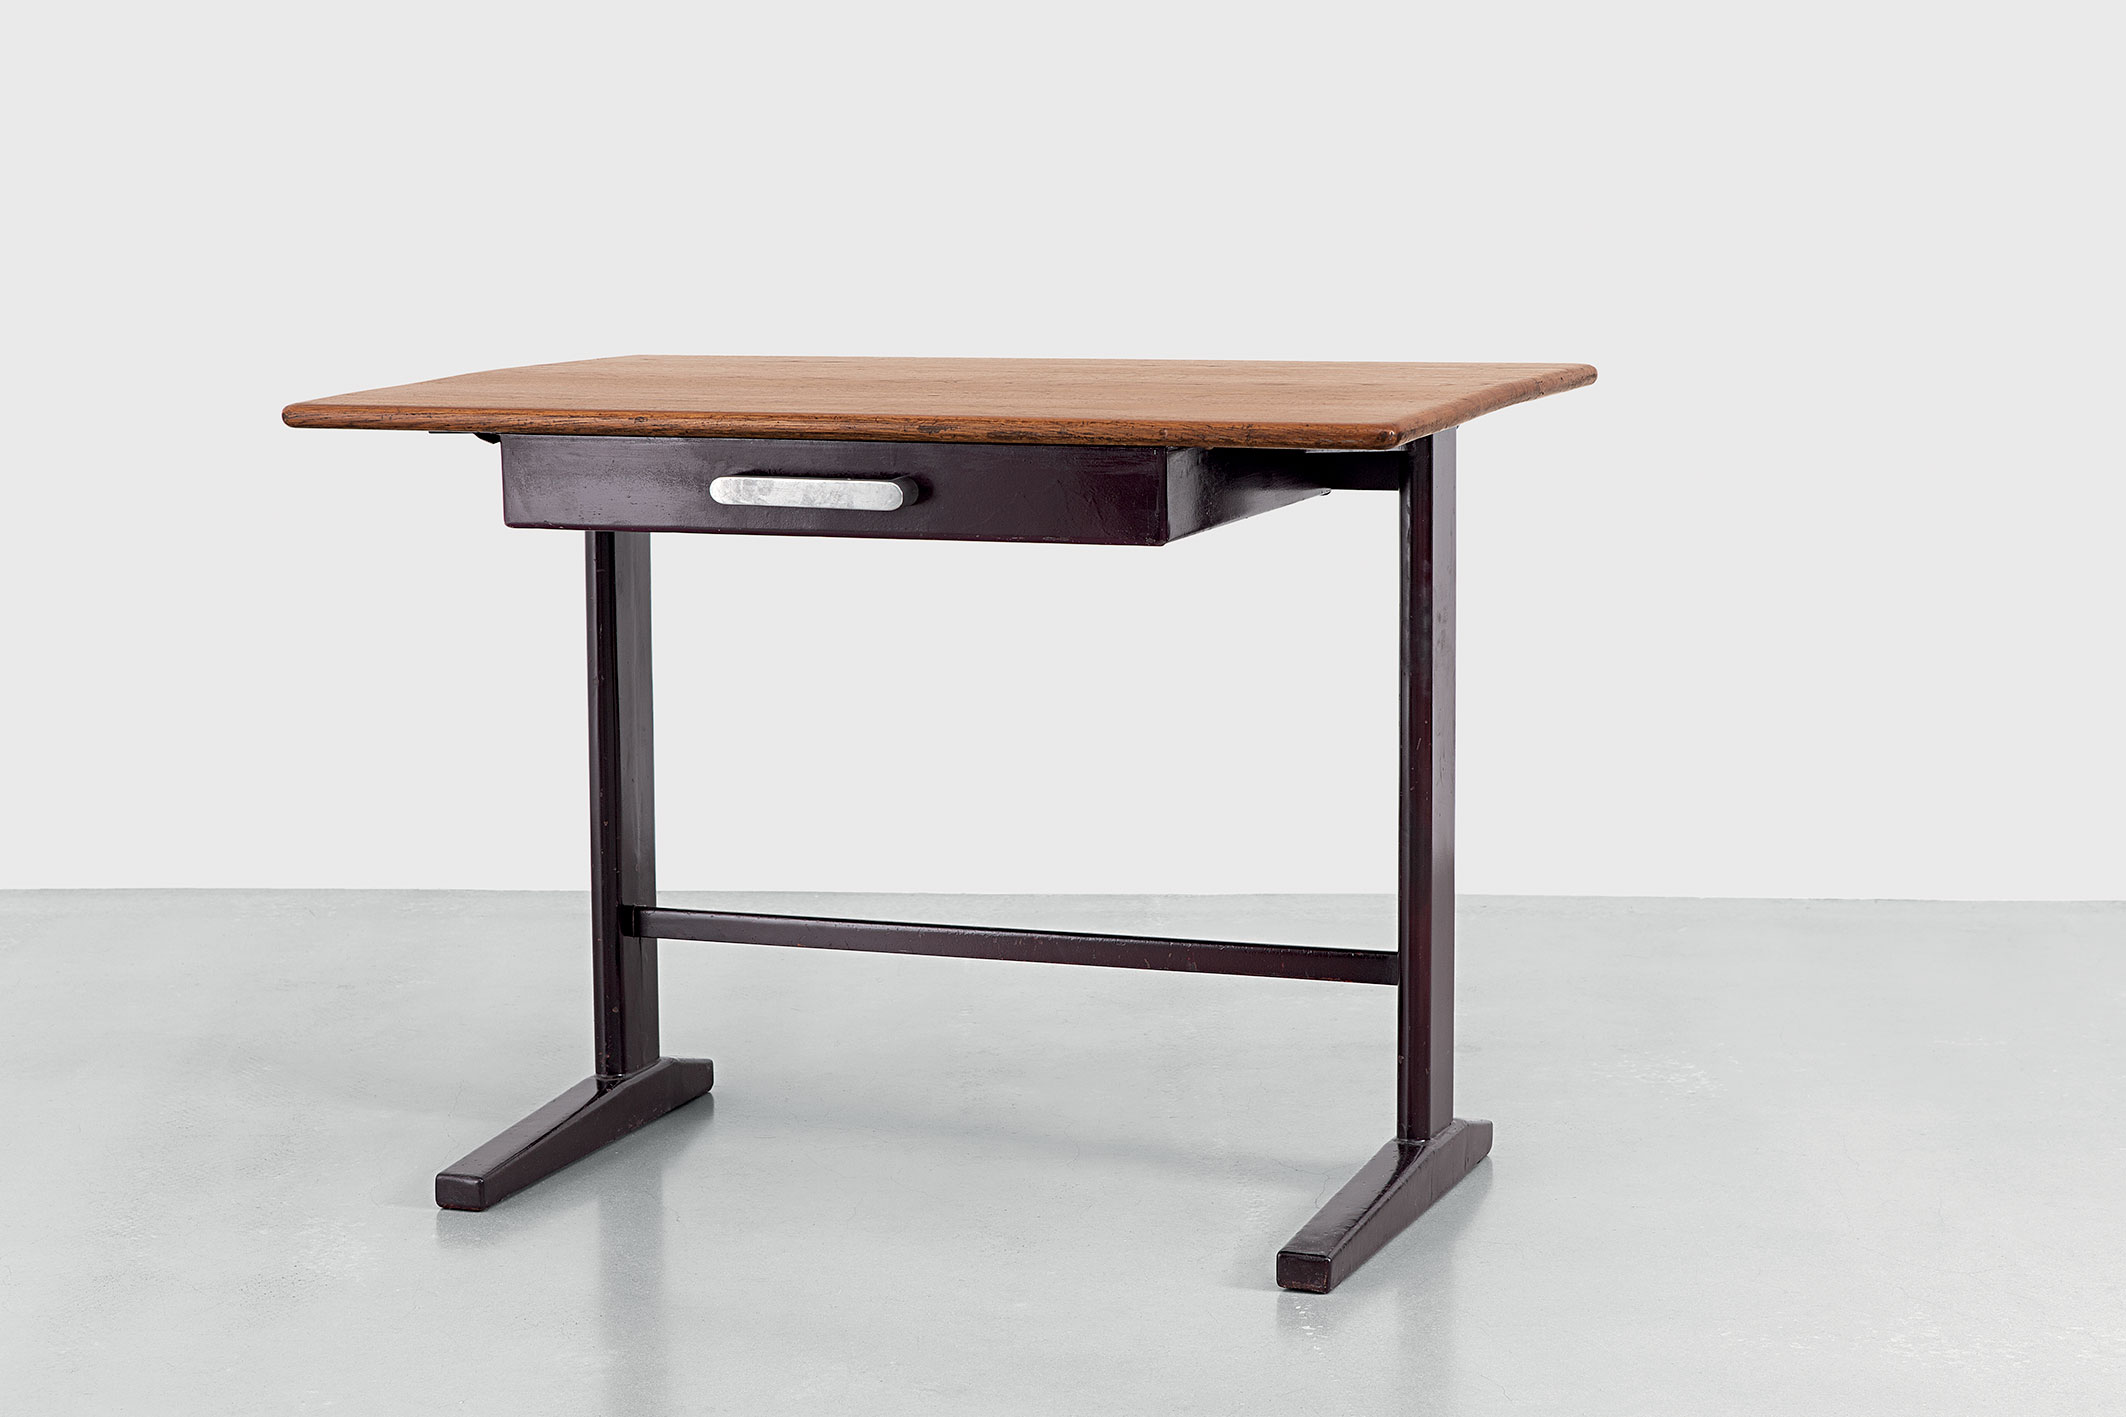 Table no. 20, variant with tapered feet, ca. 1935.